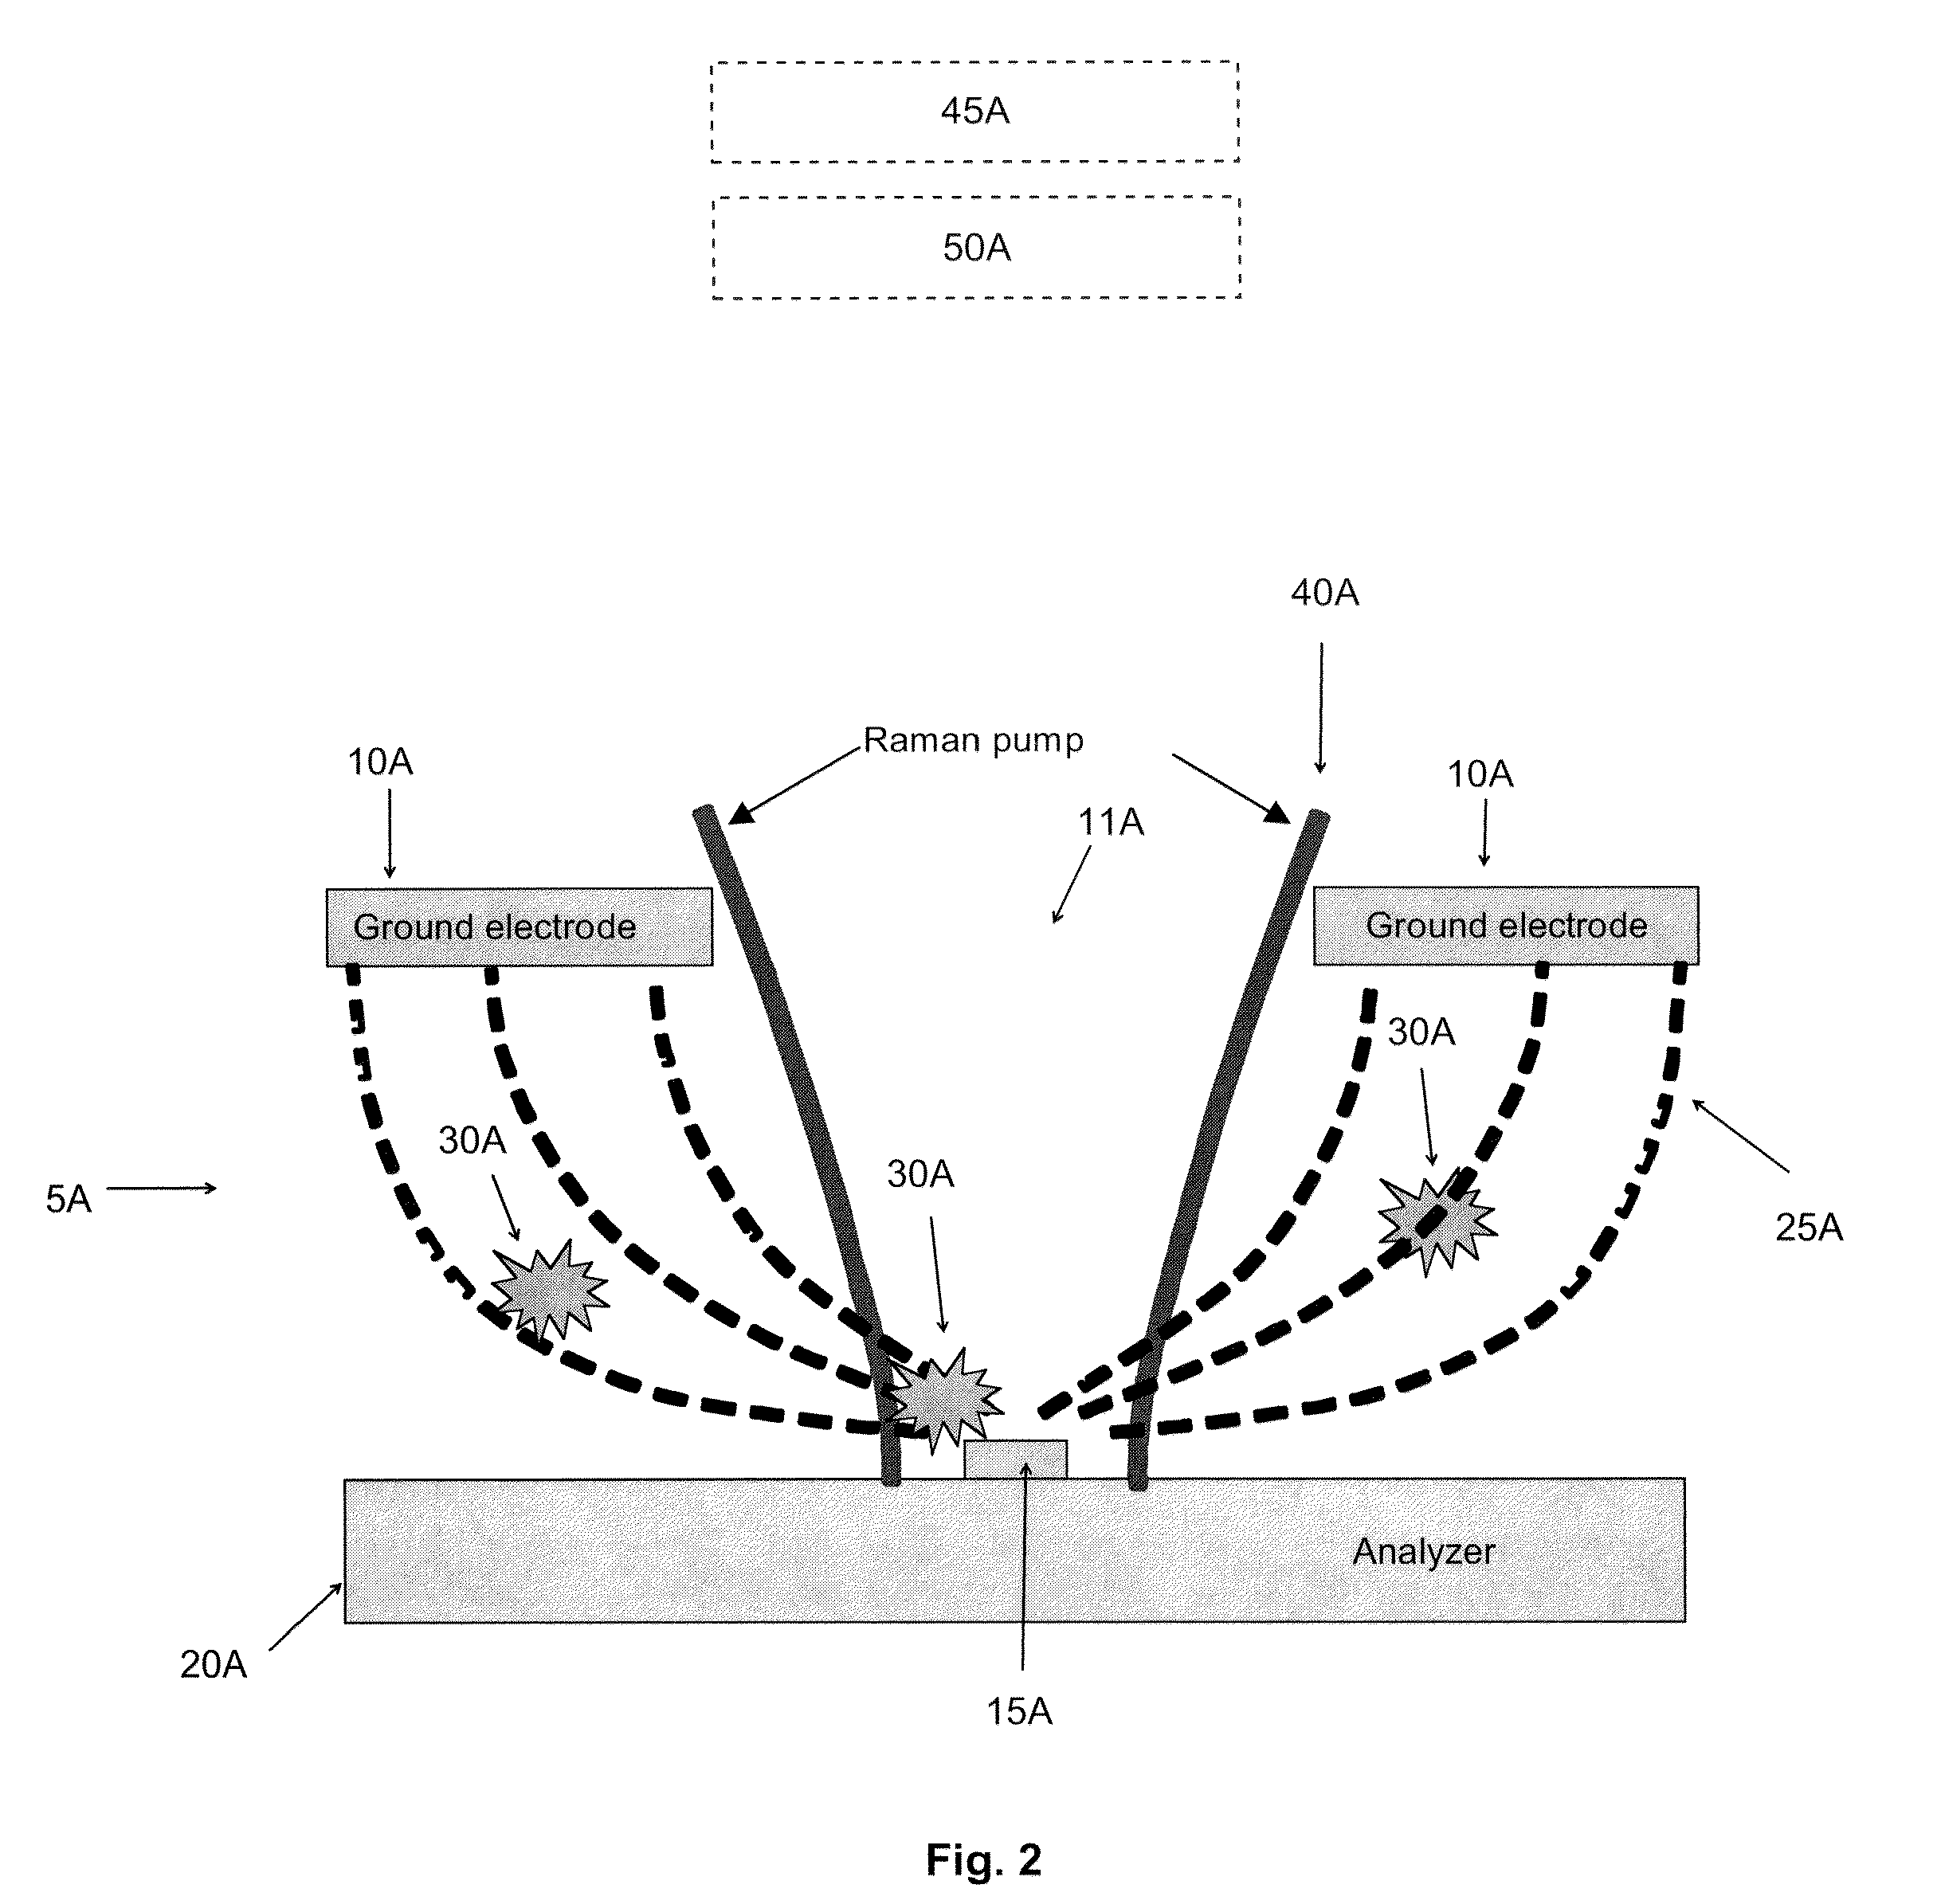 Method and apparatus for incorporating electrostatic concentrators and/or ion mobility separators with Raman, IR, UV, XRF, LIF and LIBS spectroscopy and/or other spectroscopic techniques